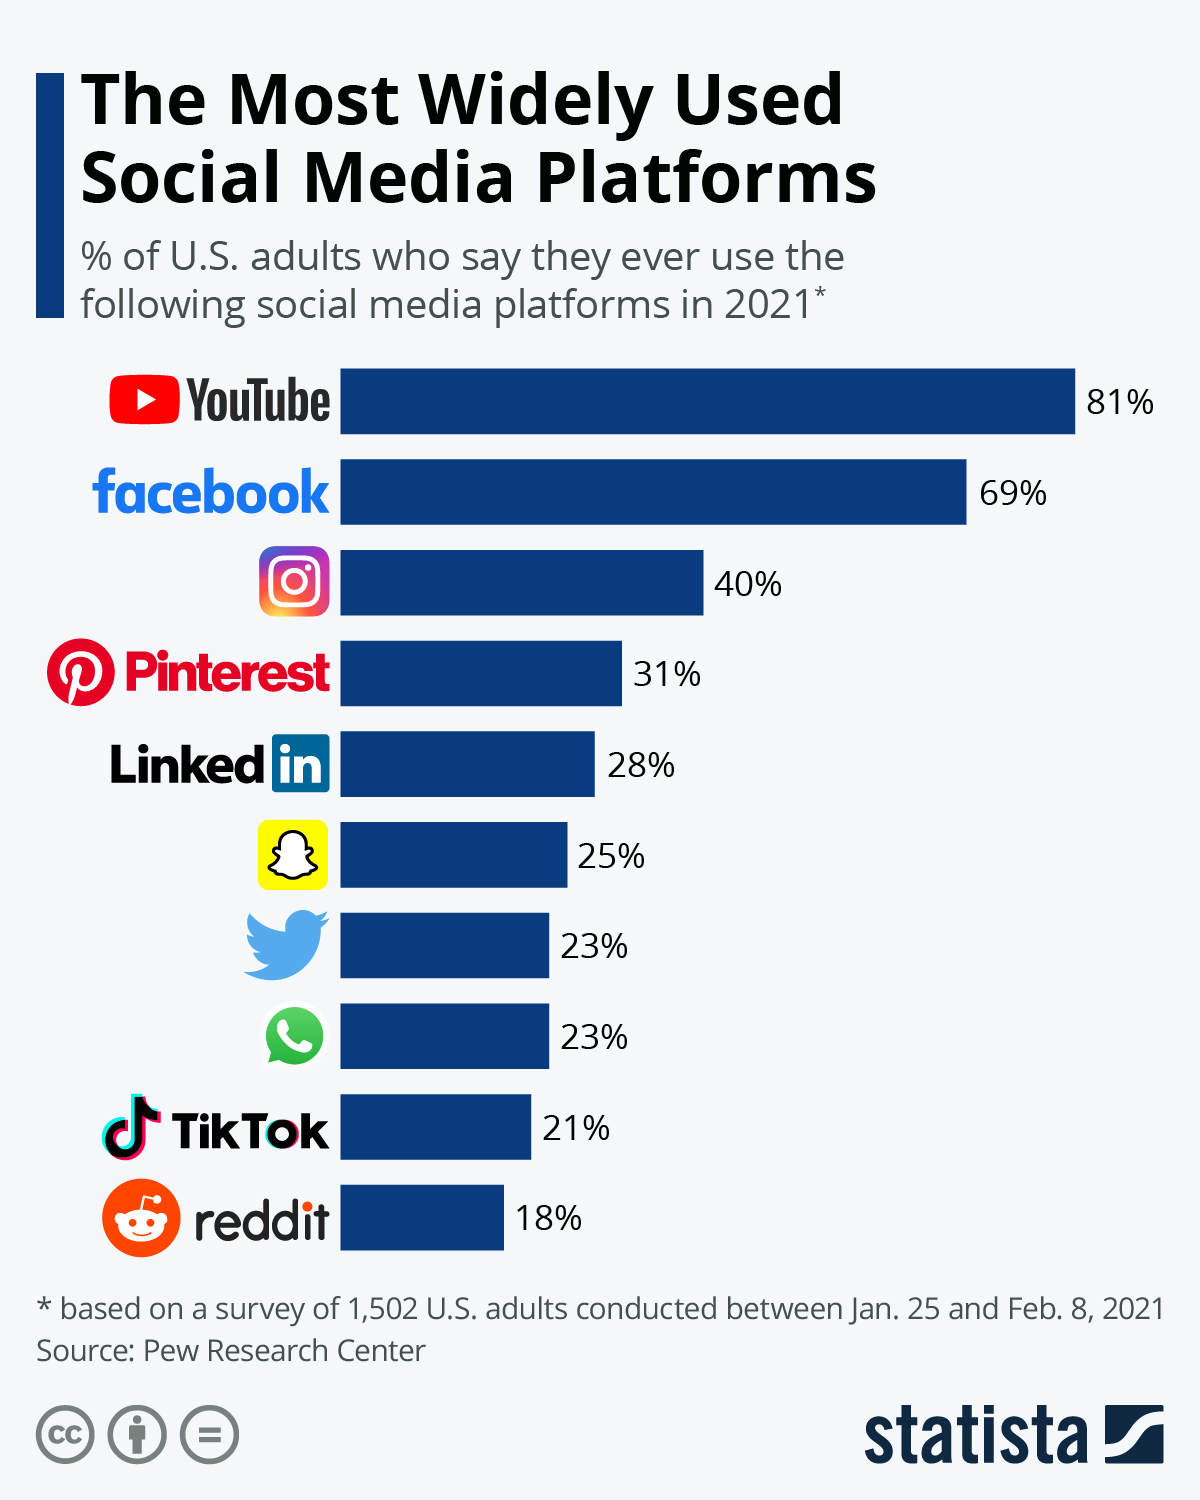 Which are the most widely used social media platforms?